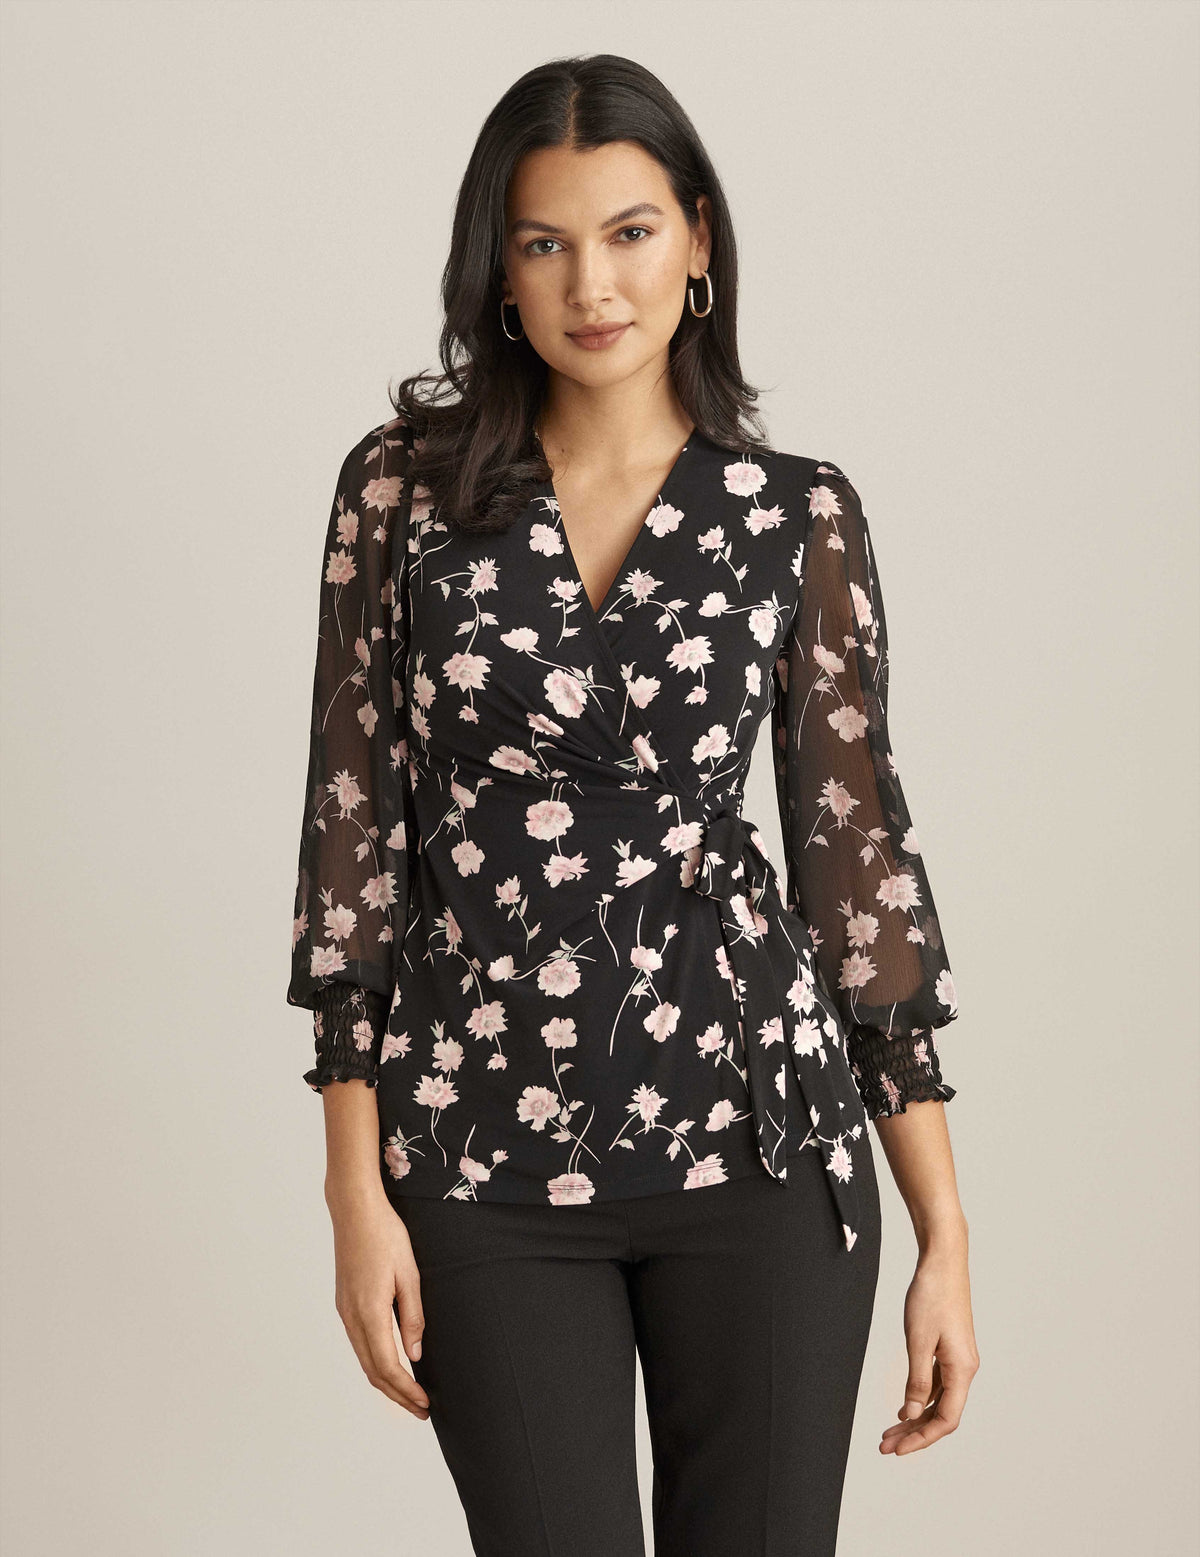 Anne Klein A Blk/Chry Blsm Mlt Printed Wrap Top with Sheer Sleeves